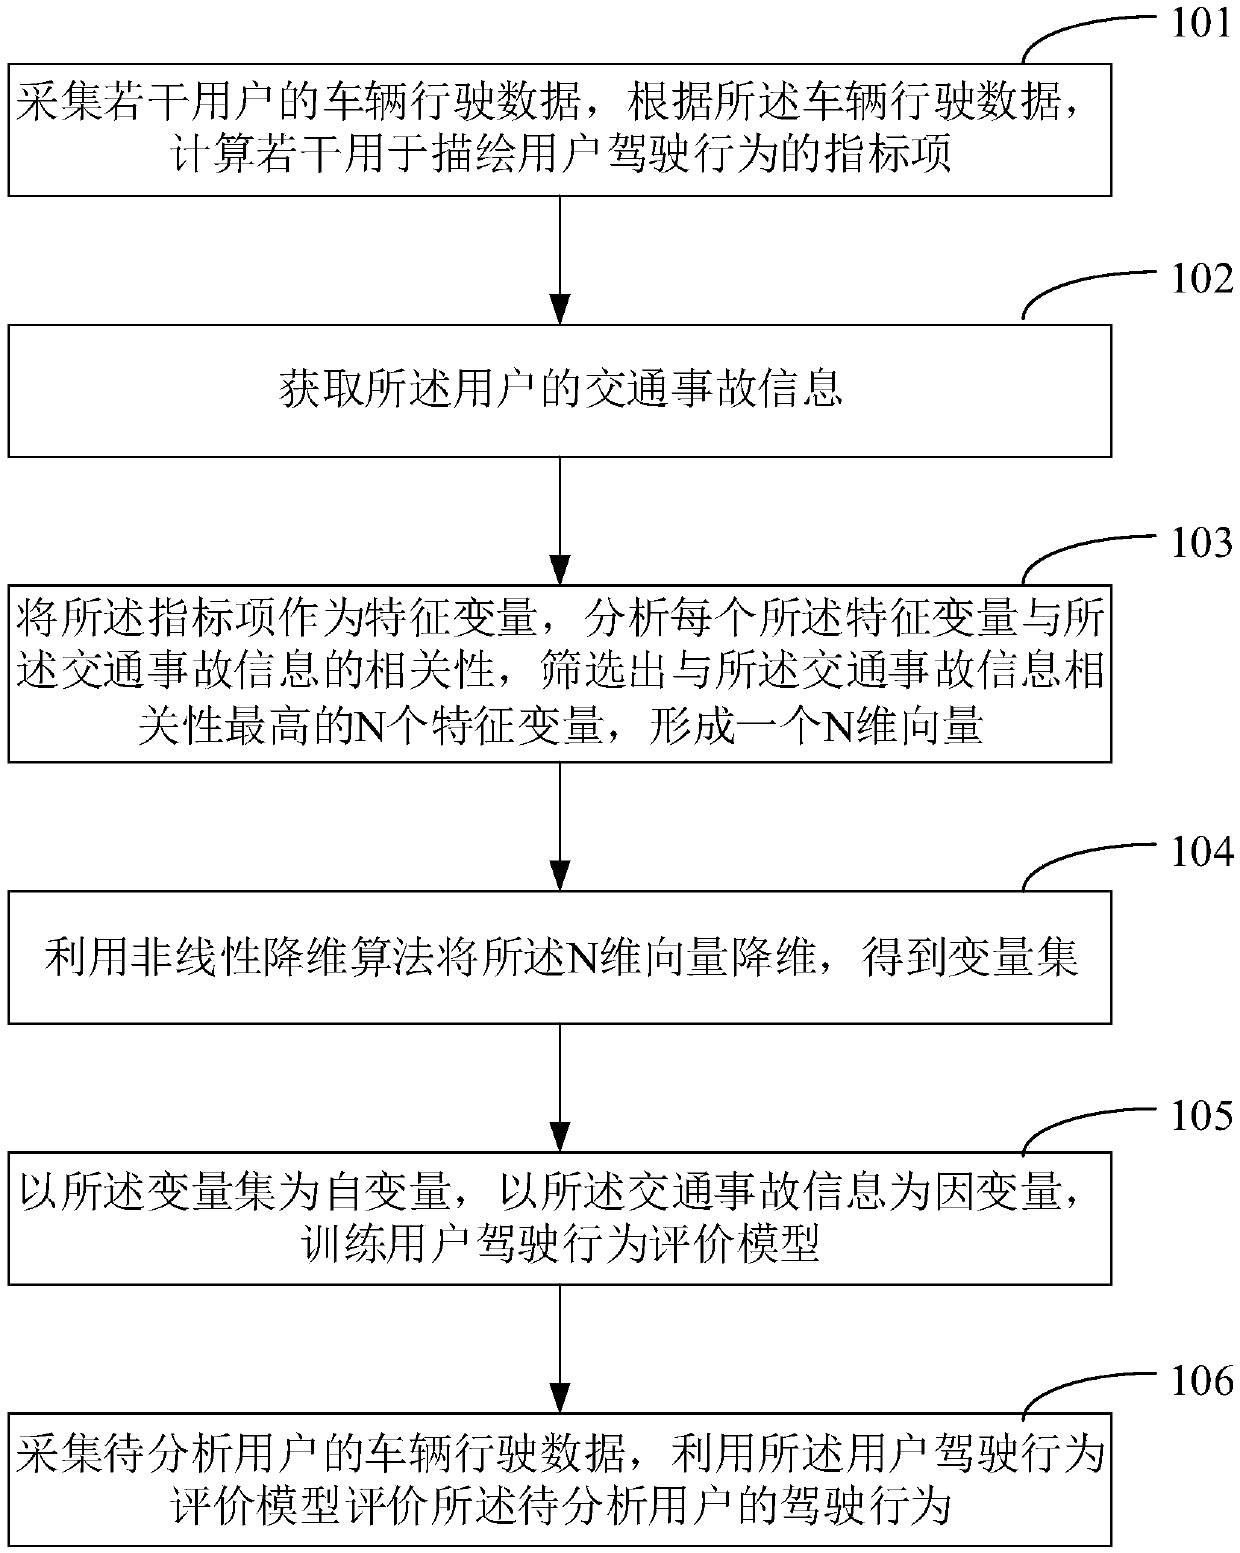 A user driving behavior analysis method and system